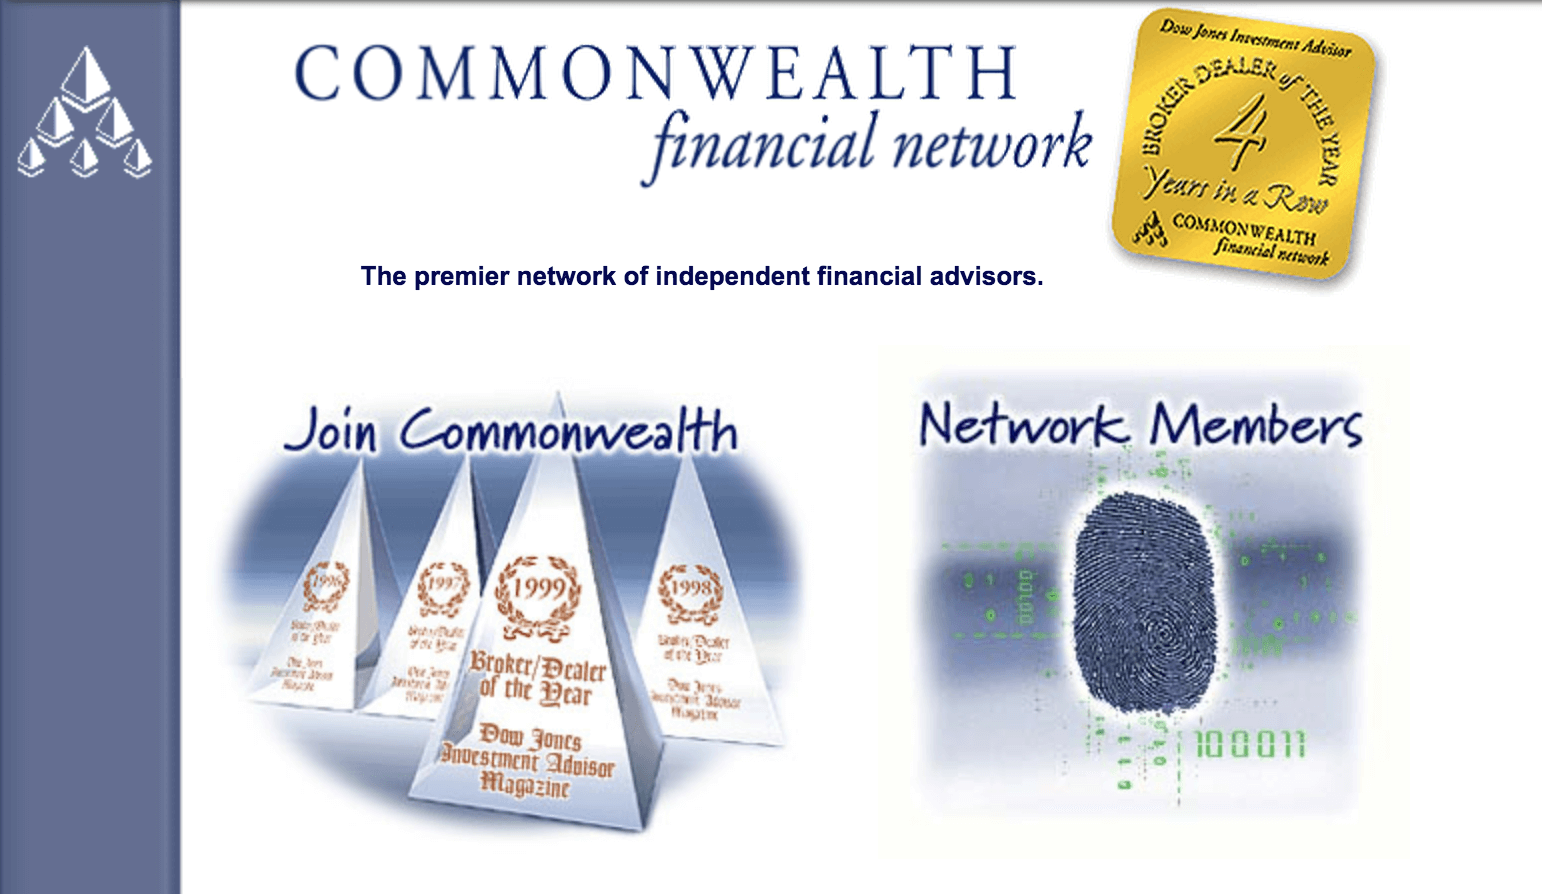 Homepage of Commonwealth Financial - 1999